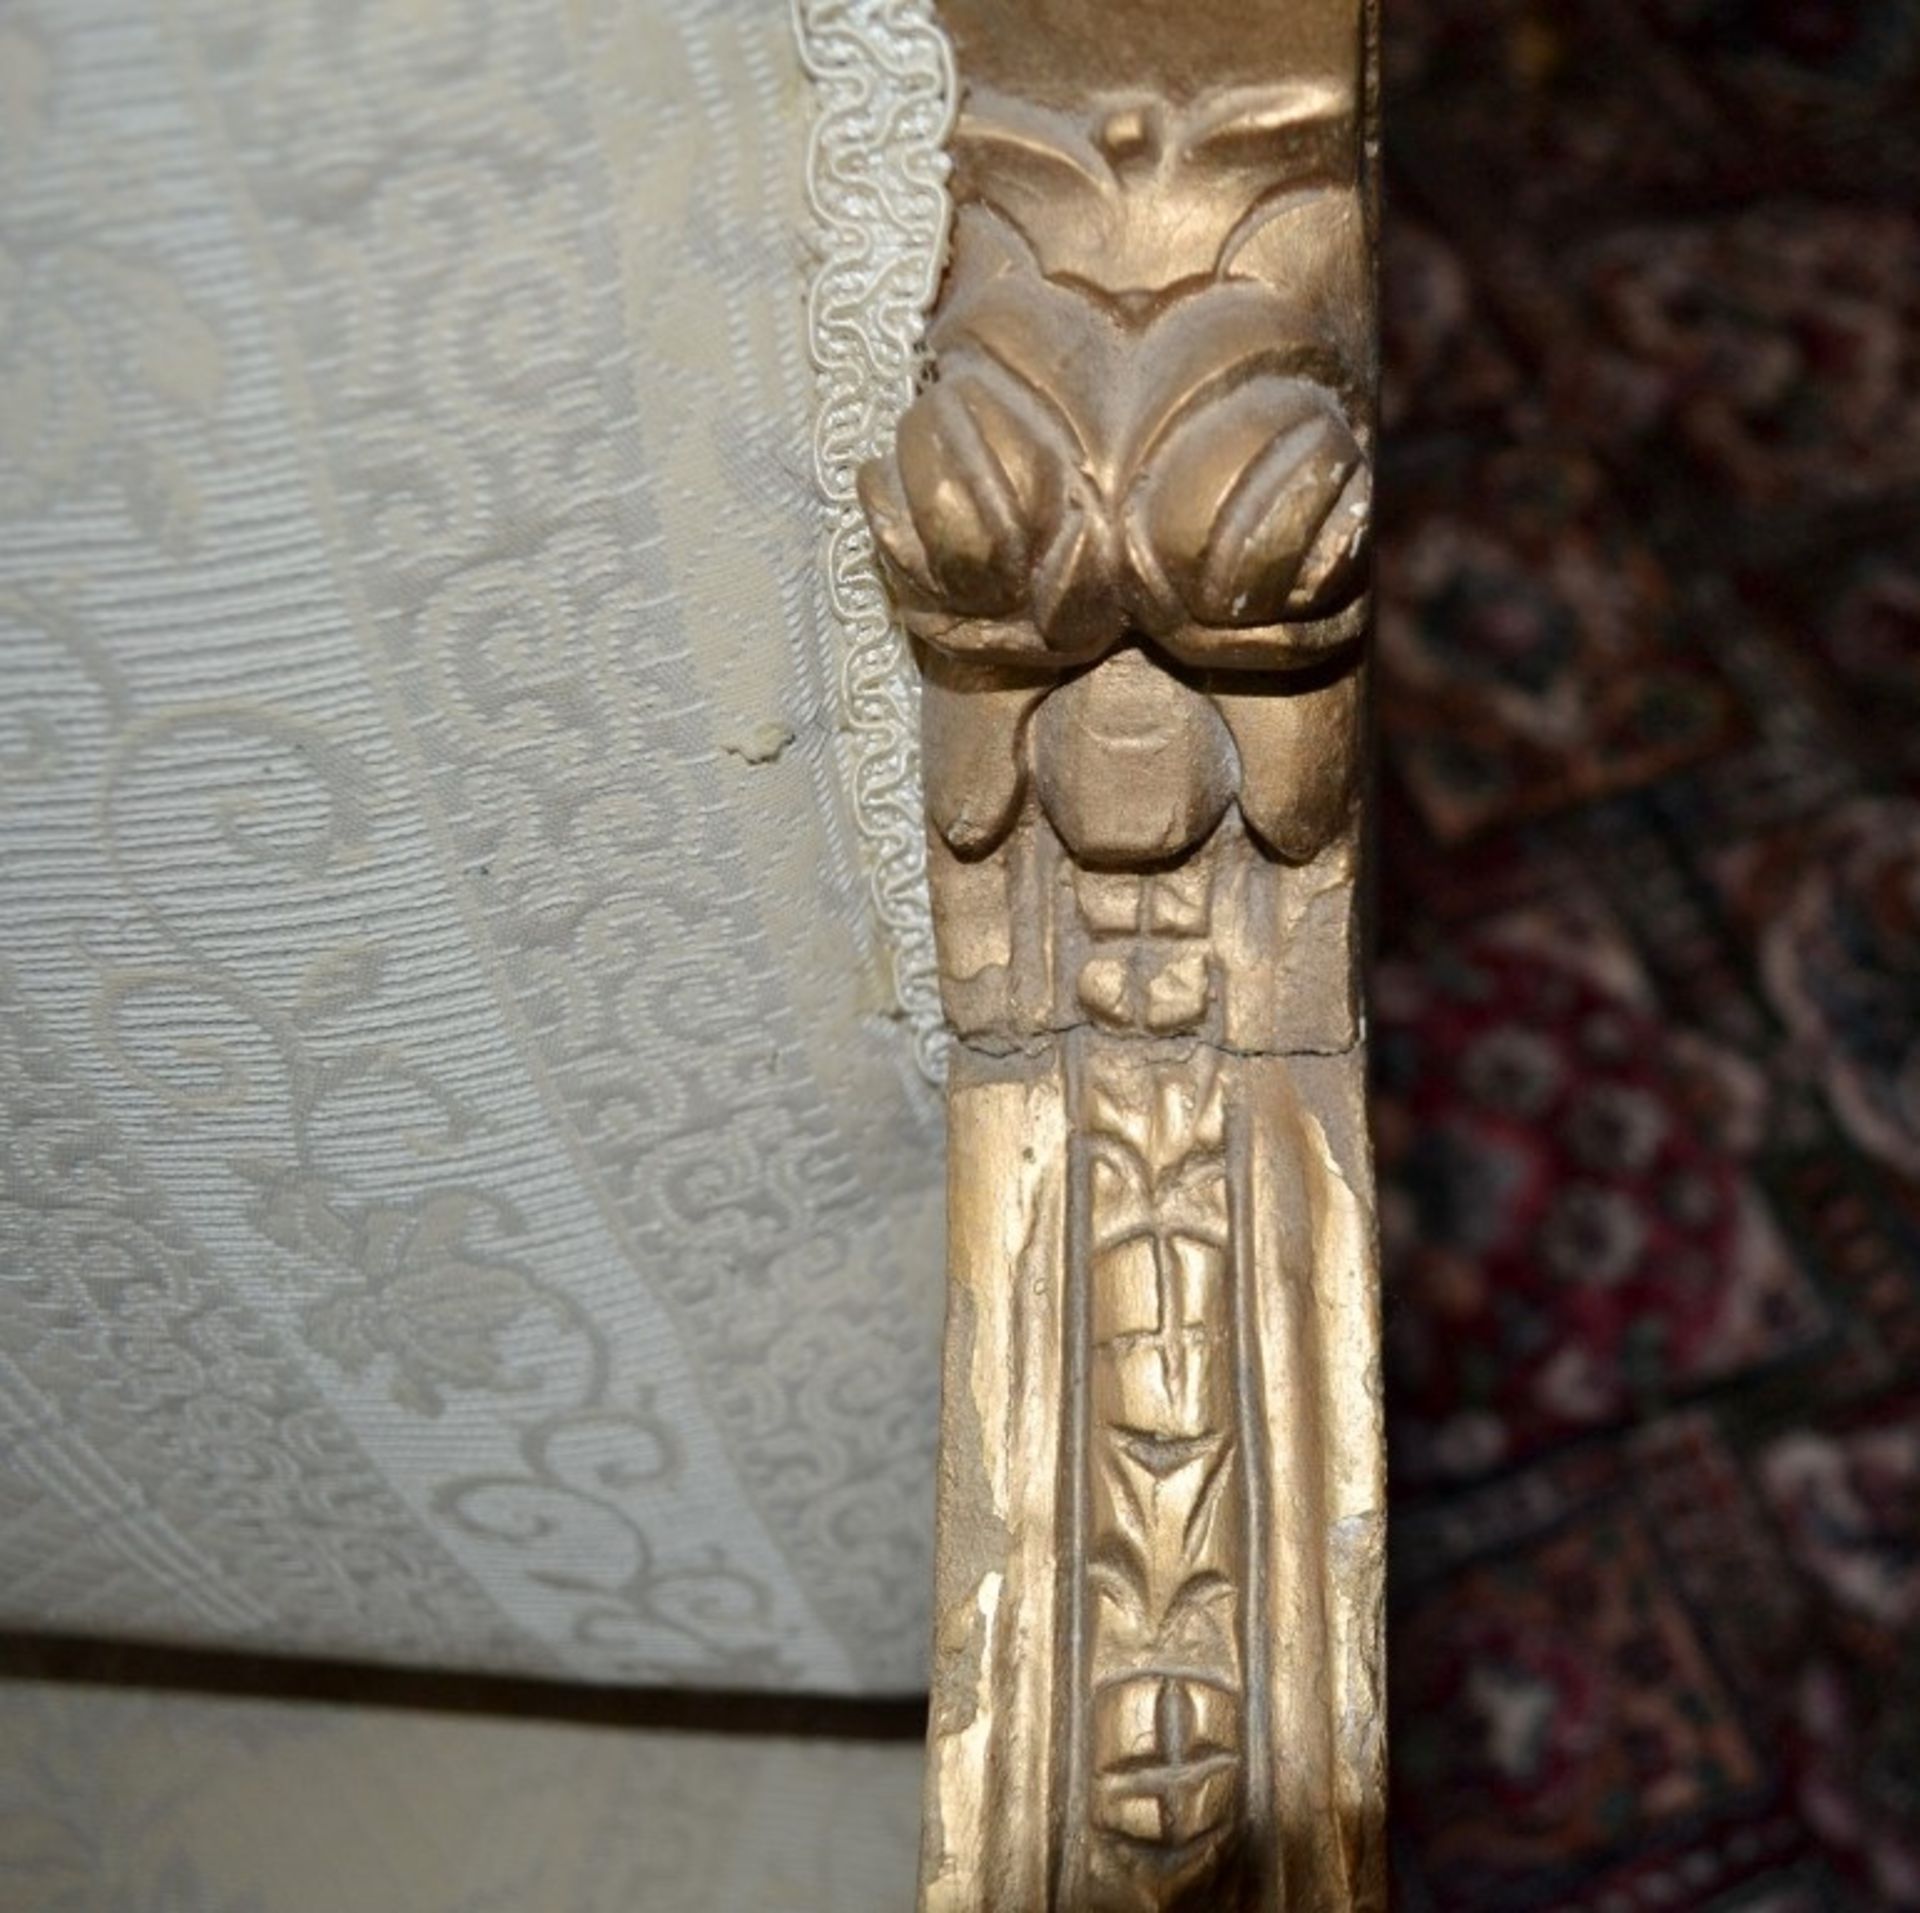 1 x Period Gold Gilt Armchair - Upholstered In A Rich Cream Fabric - From A Grade II Listed Hall - Image 7 of 9